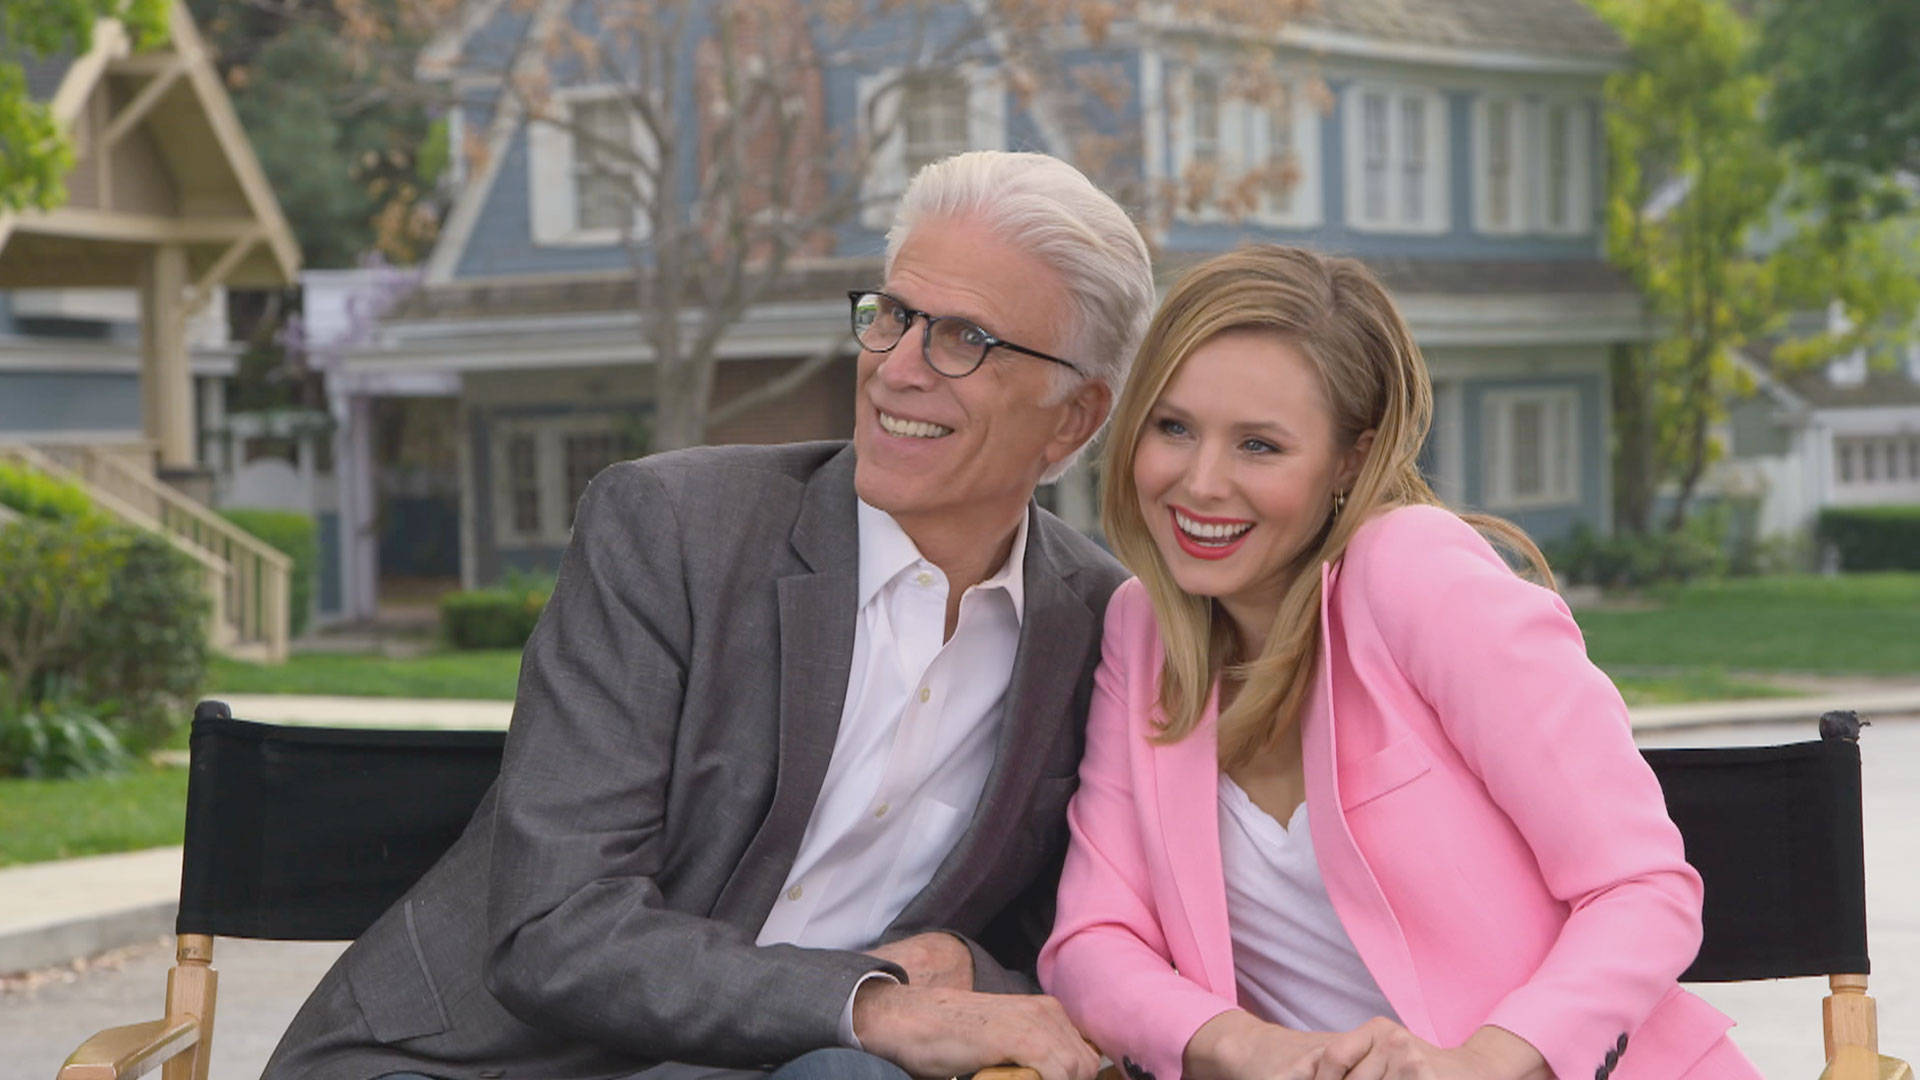 The Good Place Michel And Eleanor Picture-taking Background